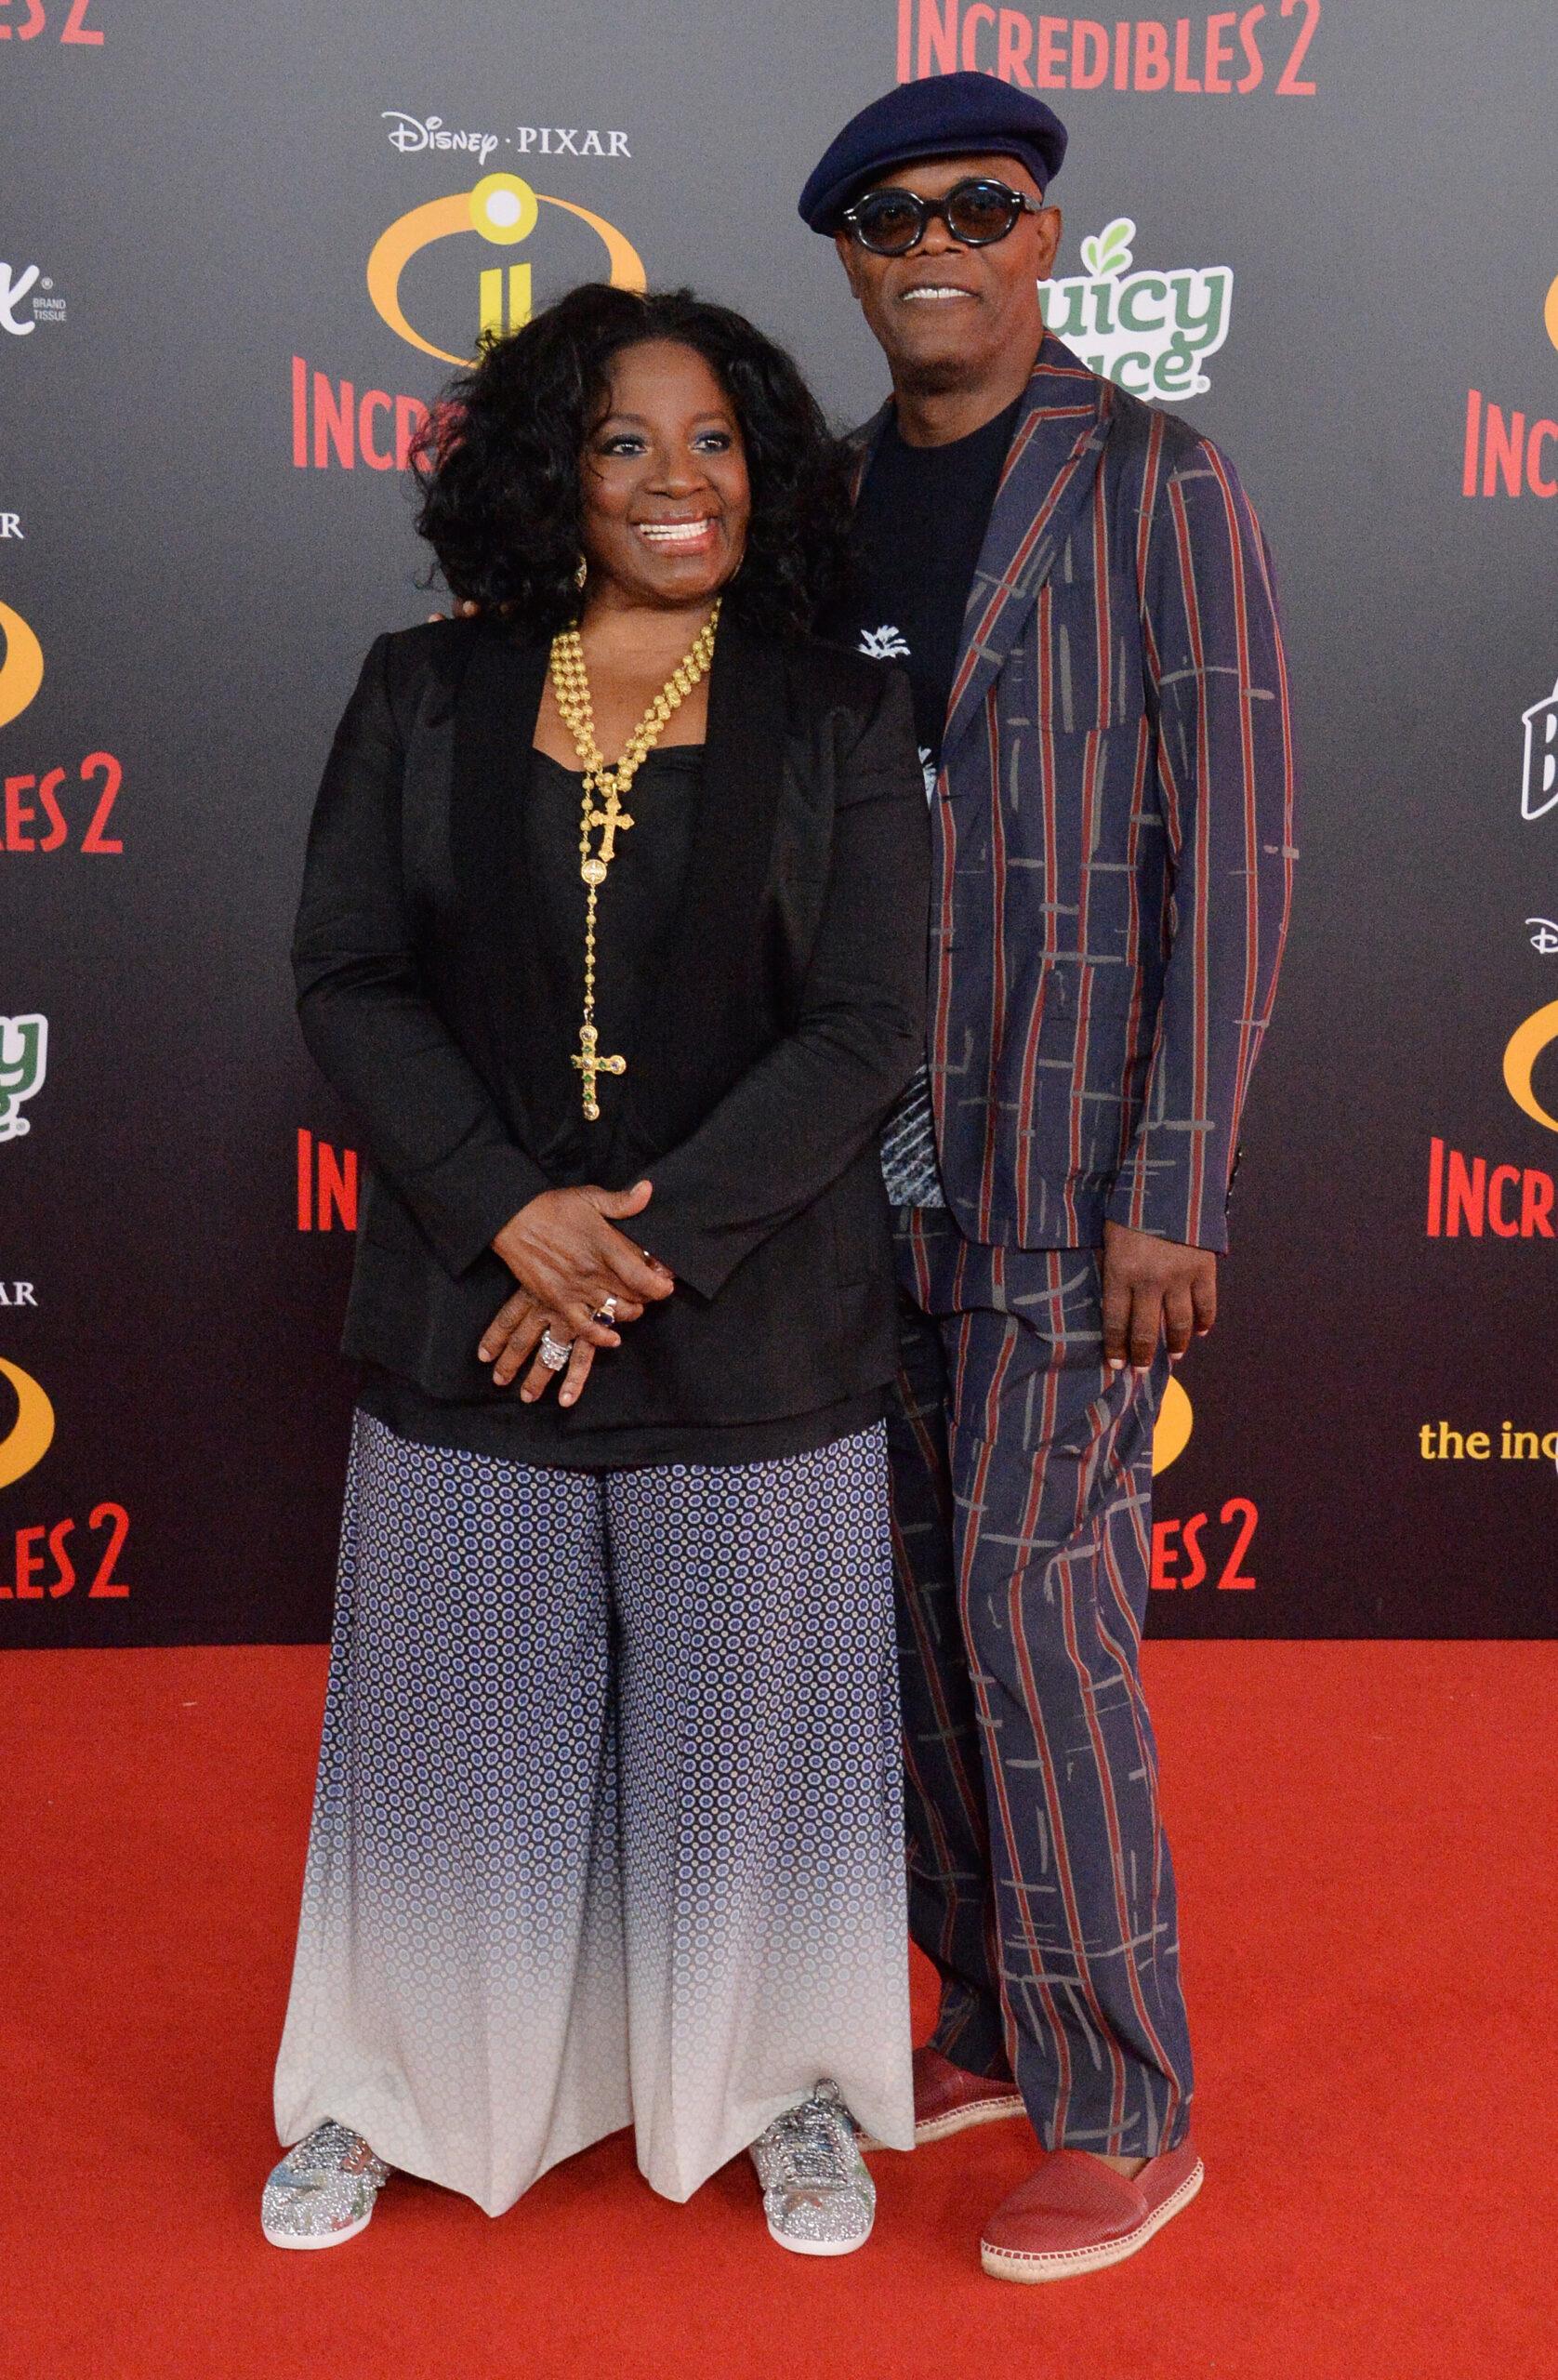 Samuel L. Jackson and LaTanya Richardson attend the "Incredibles 2" premiere in Los Angeles